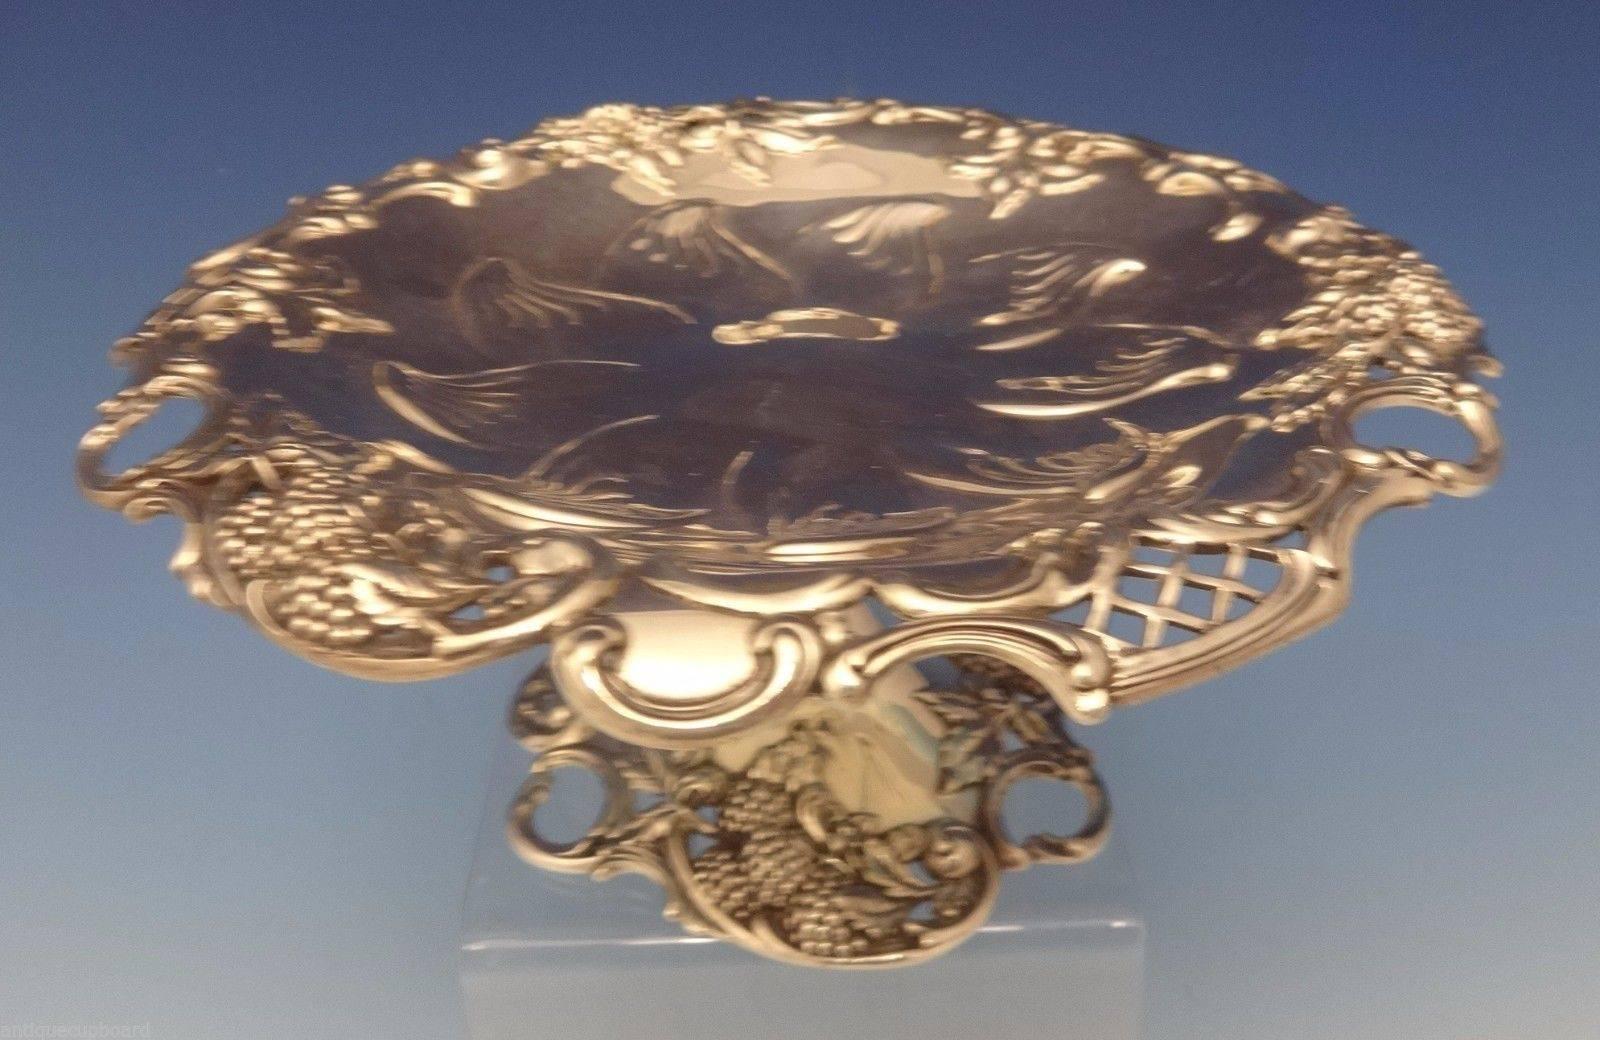 Stunning Blackberry by Tiffany & Co. sterling silver tazza.  It features a border of raised blackberries with leaves and pierced lattice.  The center is repoussed with stylized leaves.  The base is also decorated with blackberries.  It was retailed